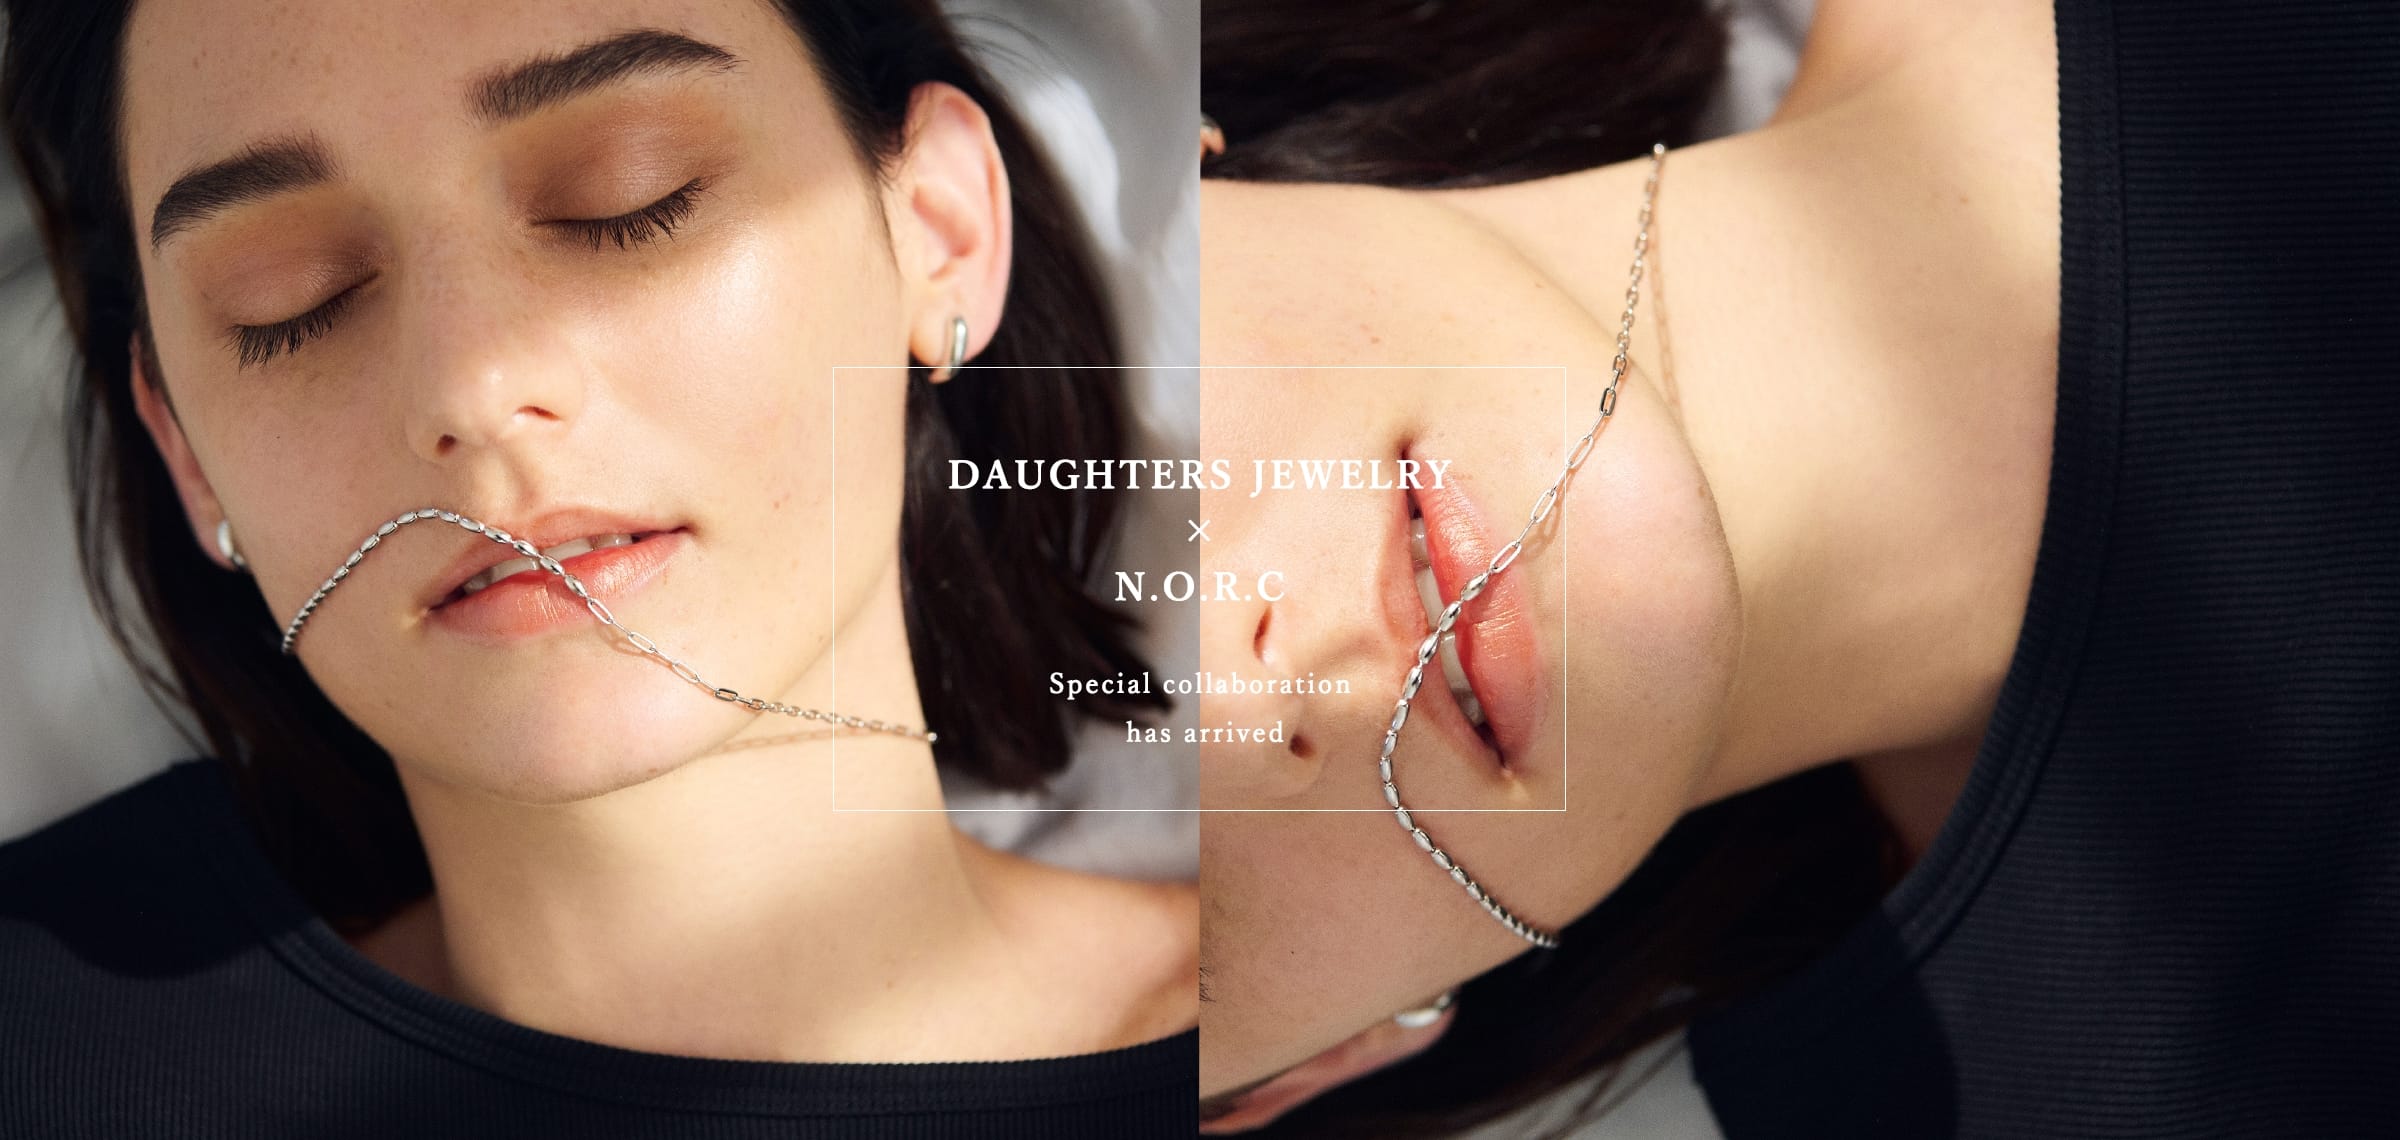 DAUGHTERS JEWELRY × N.O.R.C Special collaboration has arrived